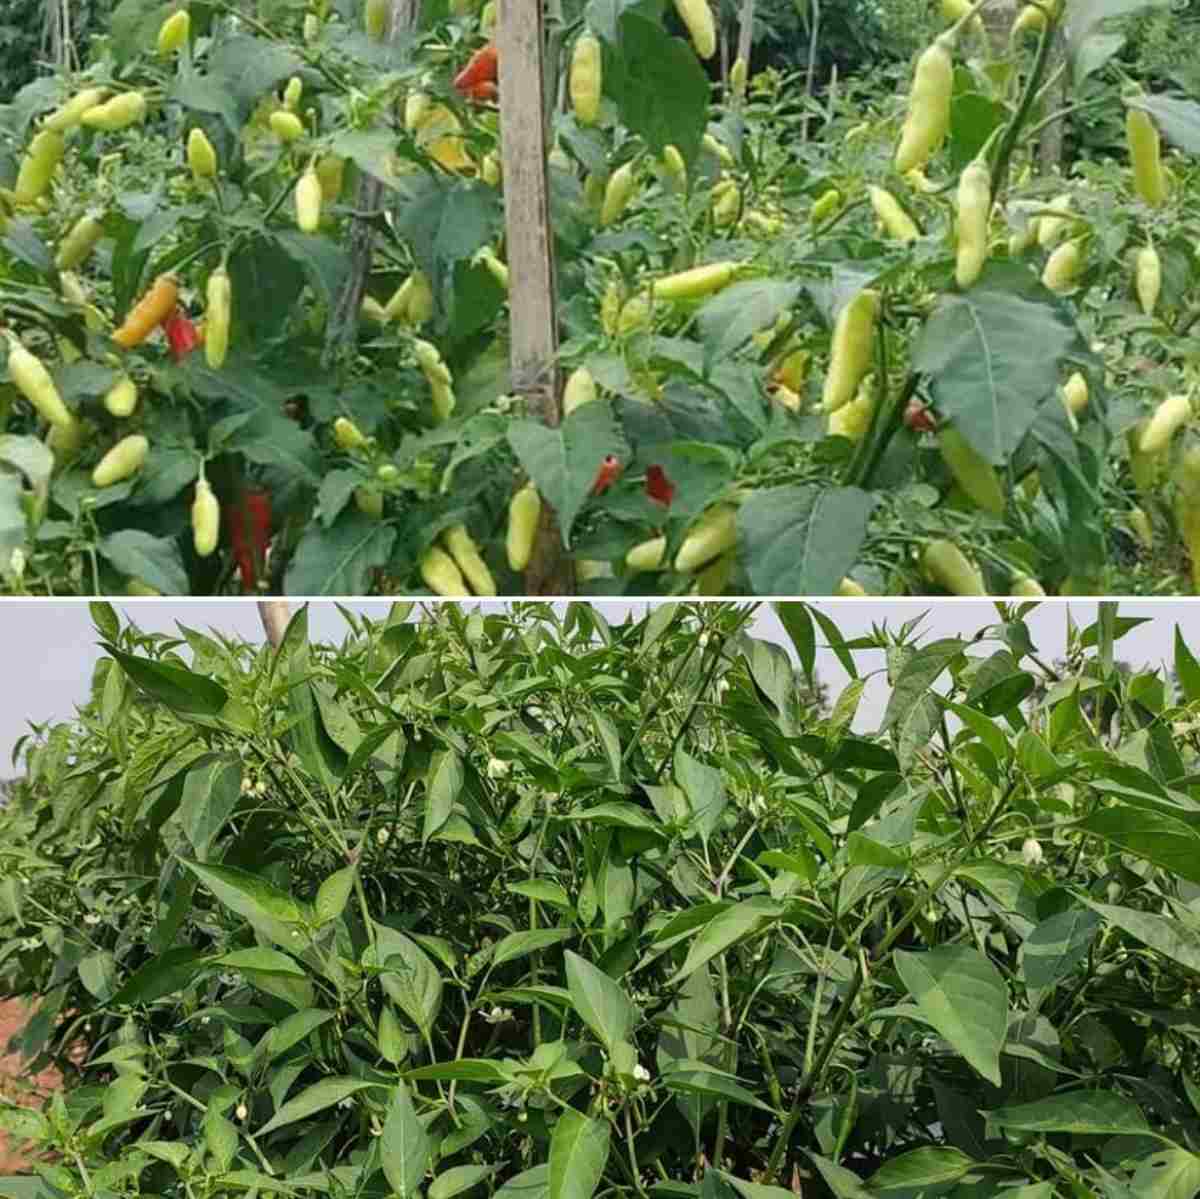 Reasons for Chilli flower drying and drop.